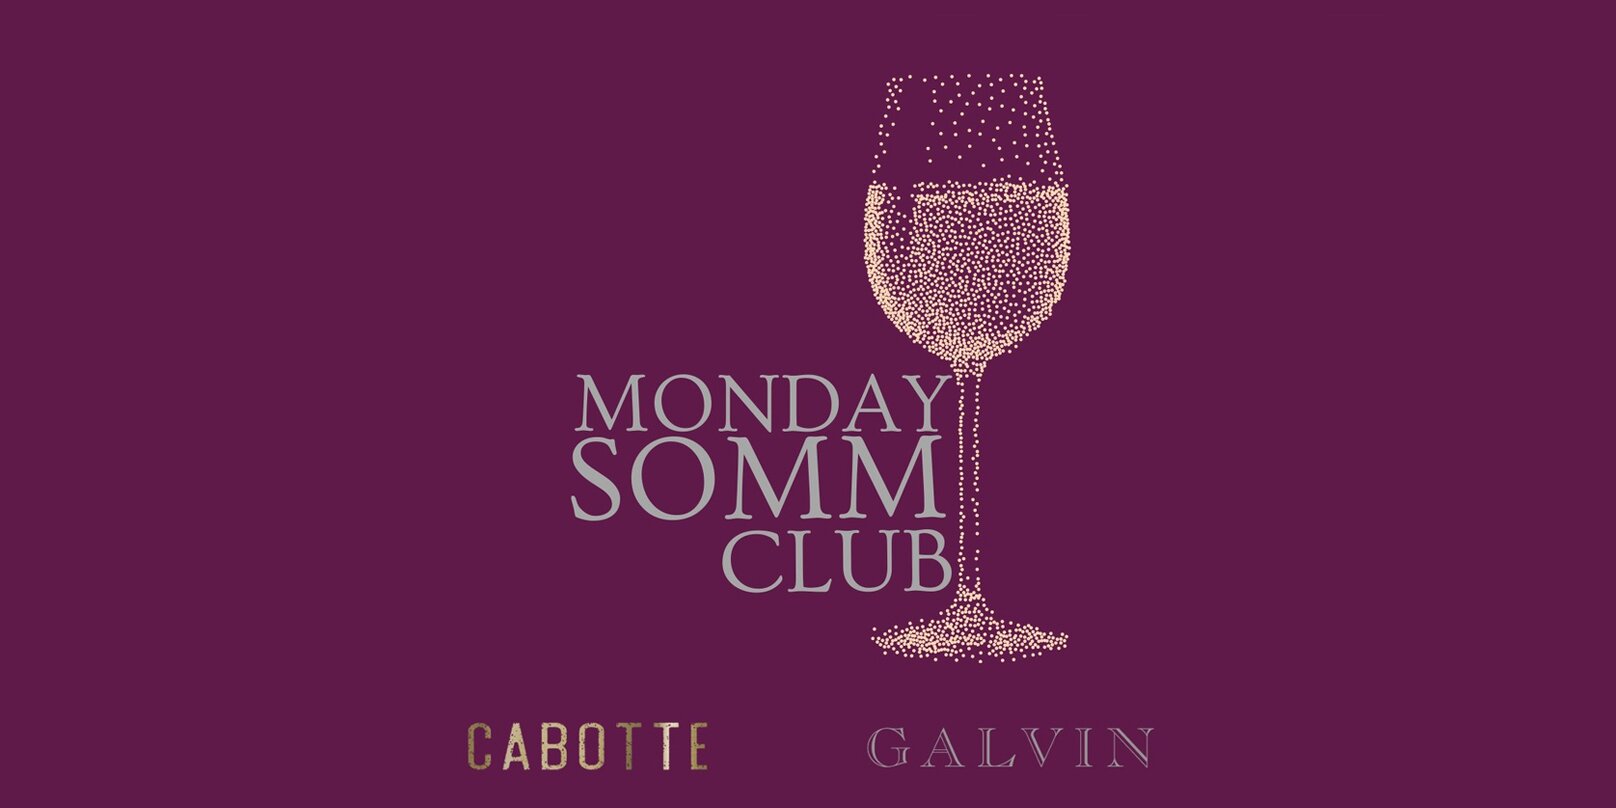 Cabotte founders partner with Galvin brothers to launch sommelier club